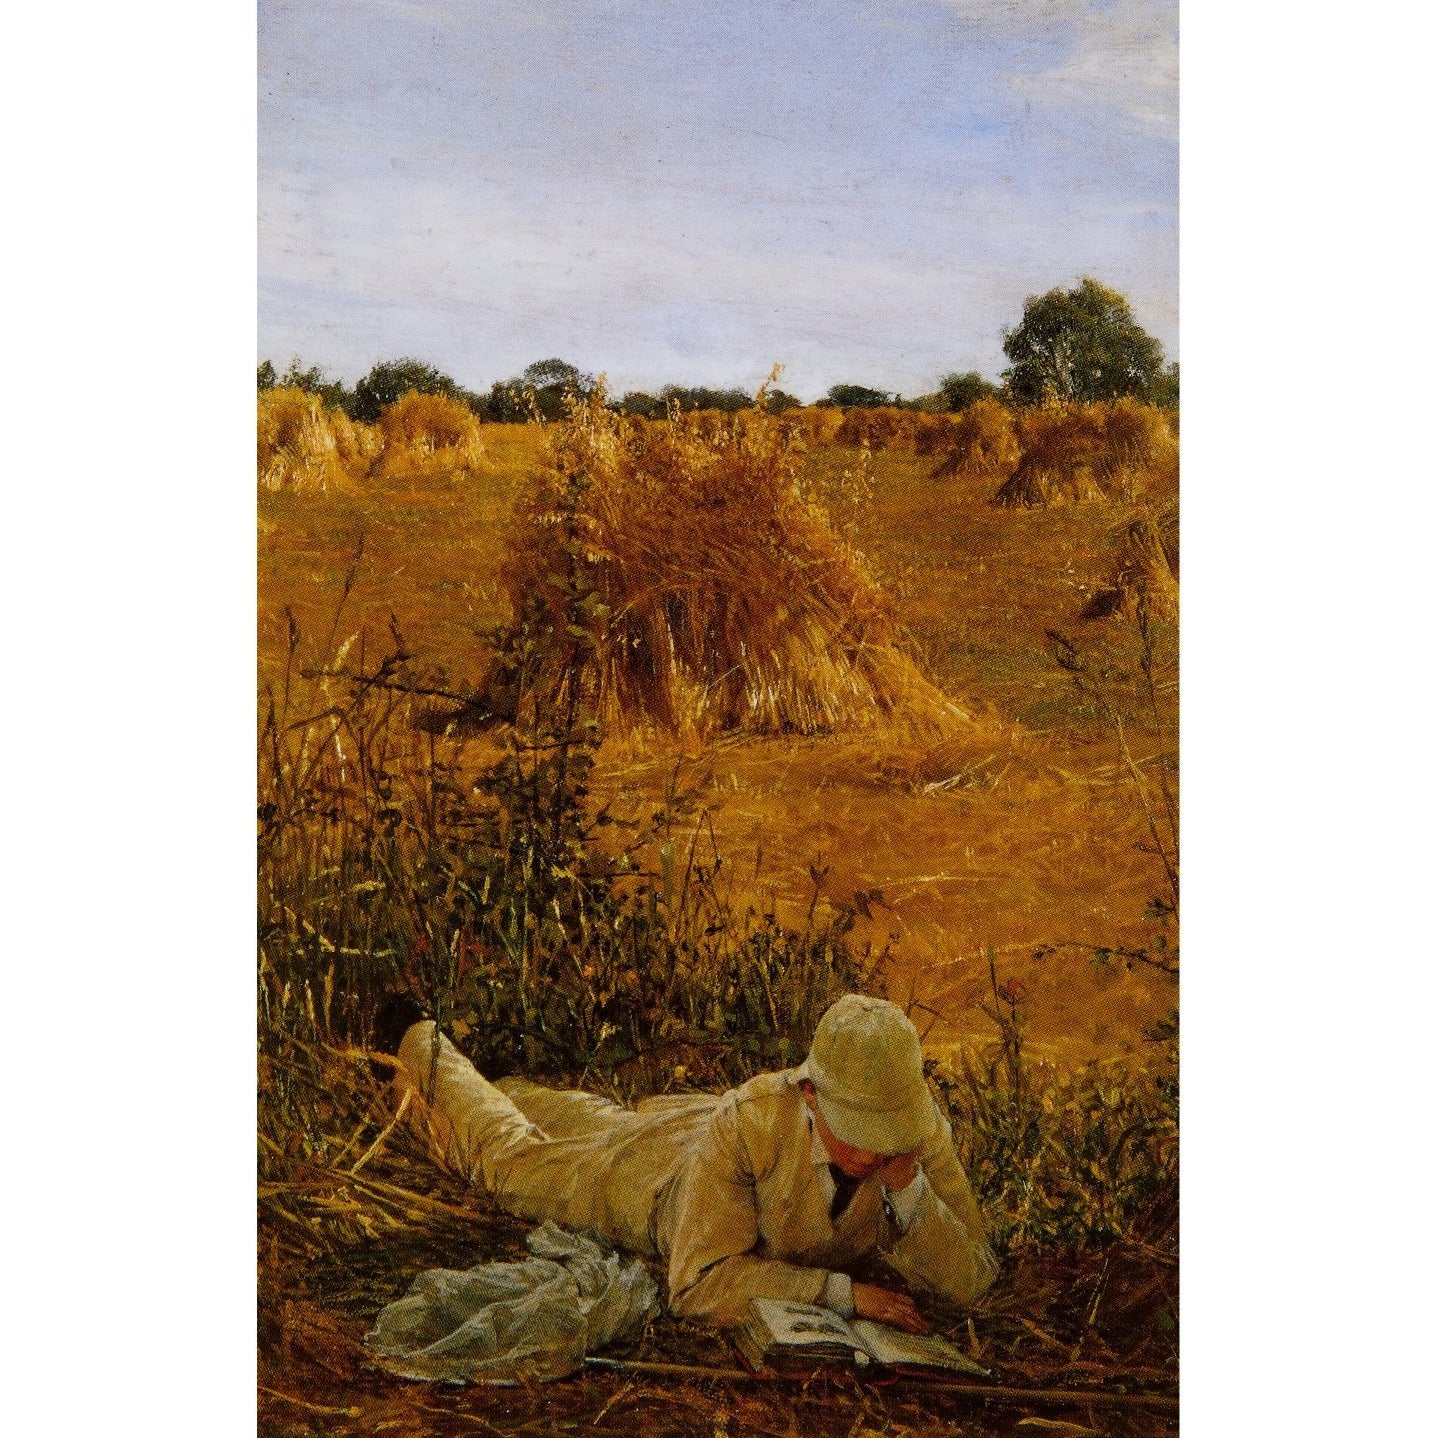 Notecard - 94 Degrees in the Shade by Lawrence Alma-Tadema. From the Fitzwilliam Museum, brought to you by CuratingCambridge.co.uk